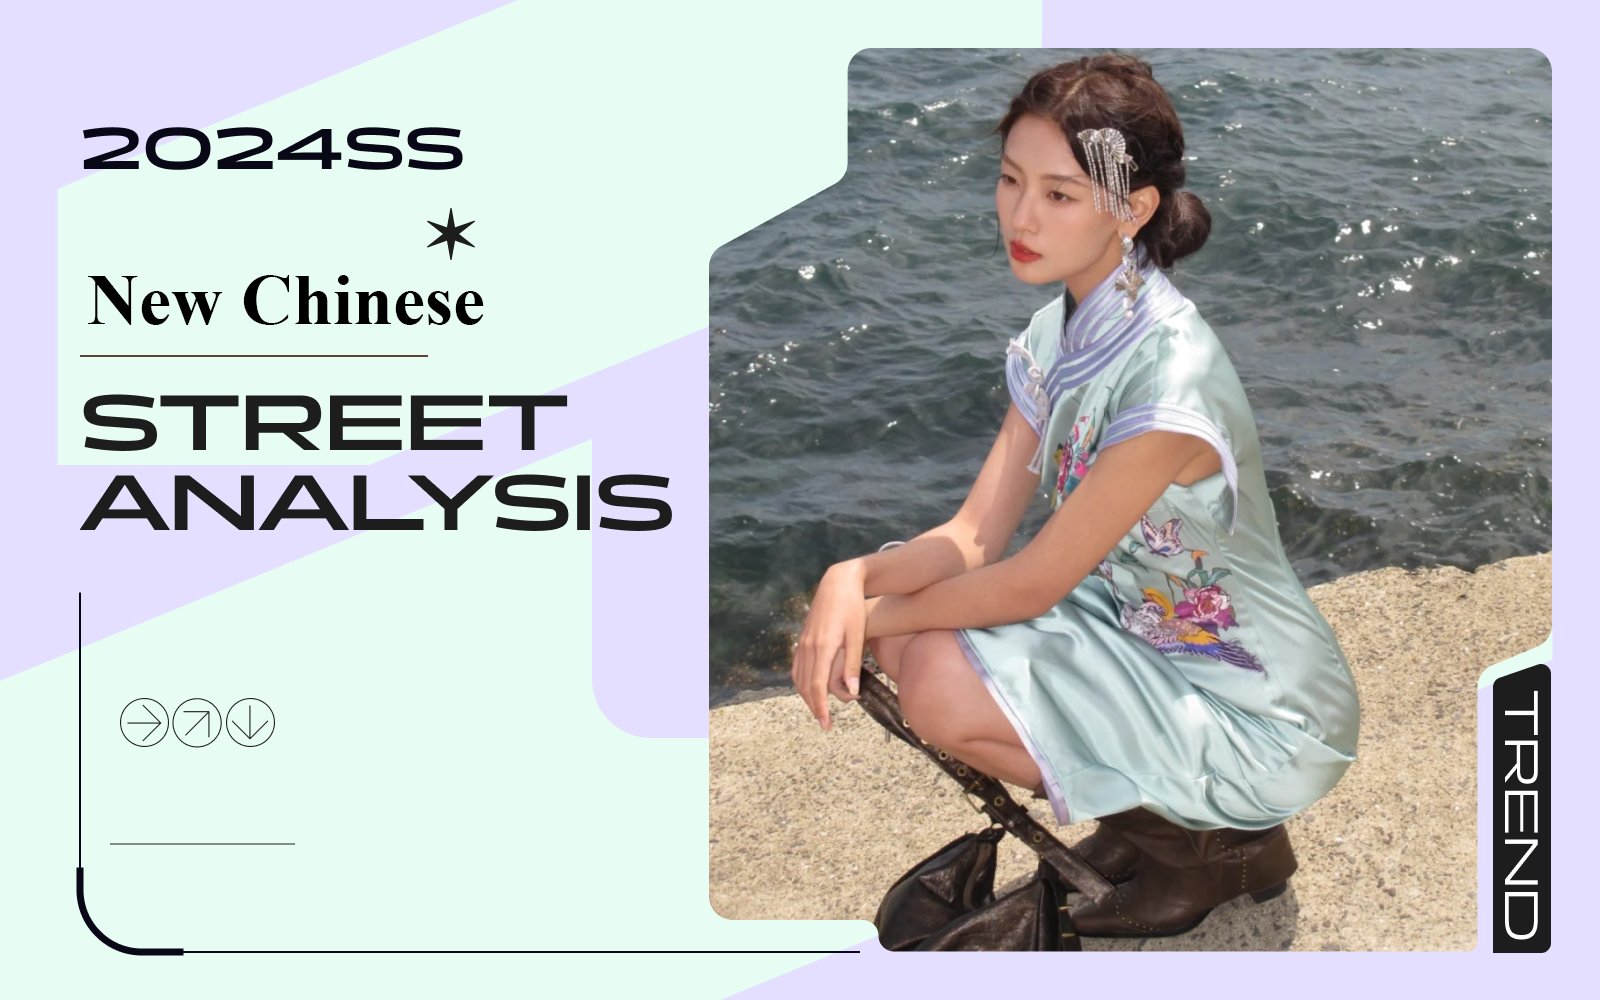 New Chinese -- The Comprehensive Analysis of Women's Street Styles